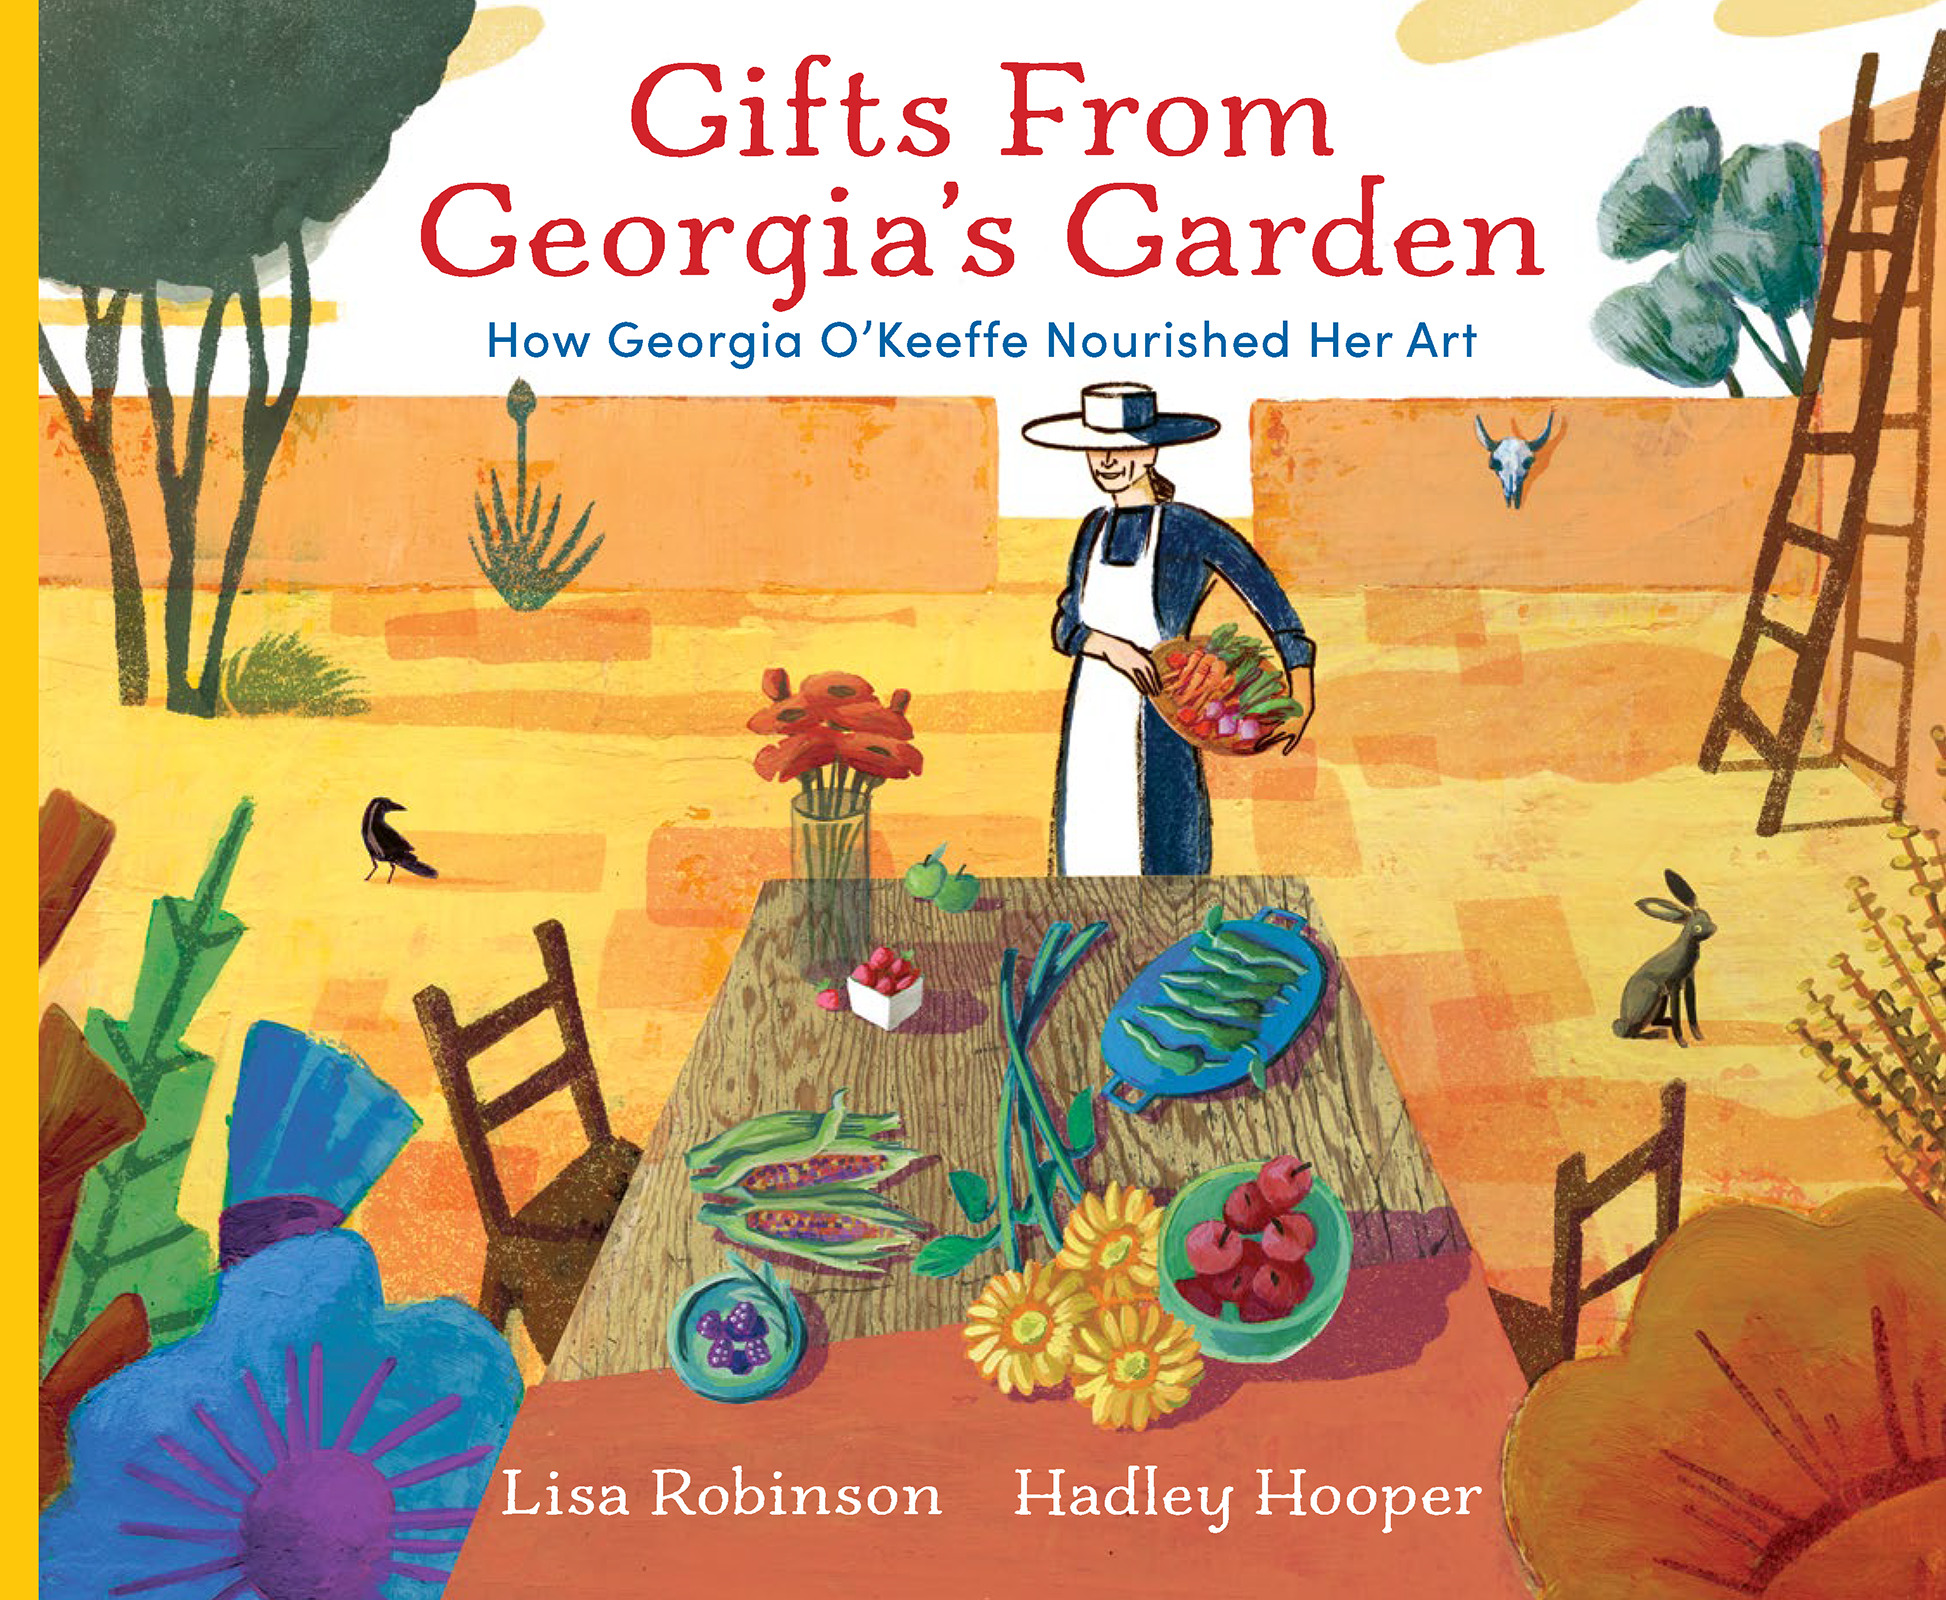 Illustrated cover of a children's book depicting Georgia O'Keeffe and a few animals near a table covered in plants, fruits, and vegetables. The title of the book is 'Gifts from Georgia O'Keeffe's Garden'